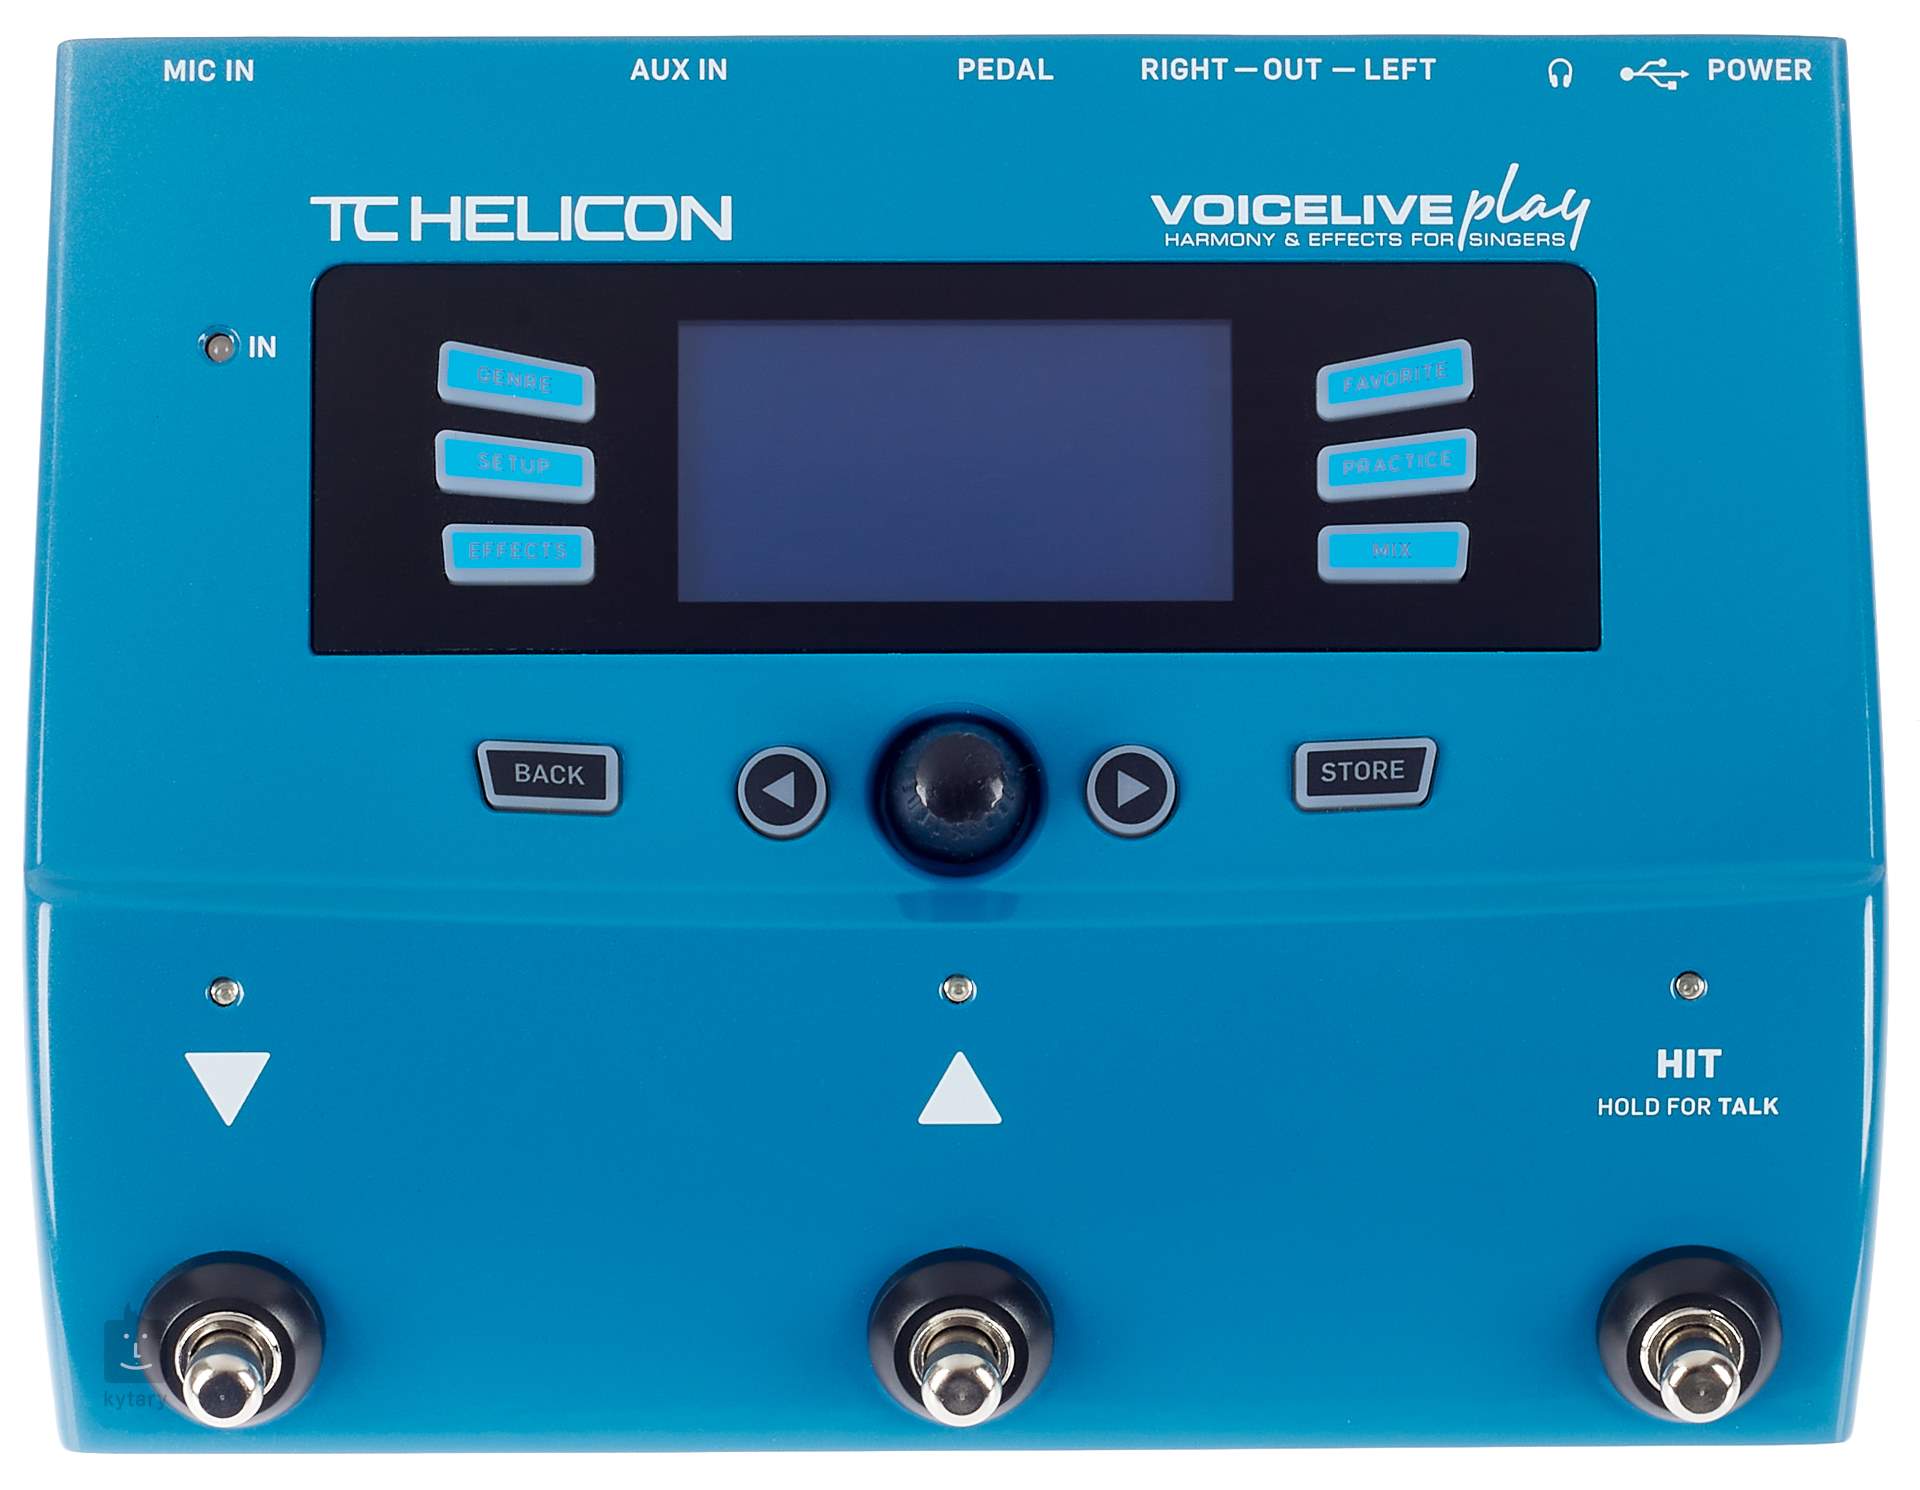 tcheliconTC HELICON VOICELIVEPLAY